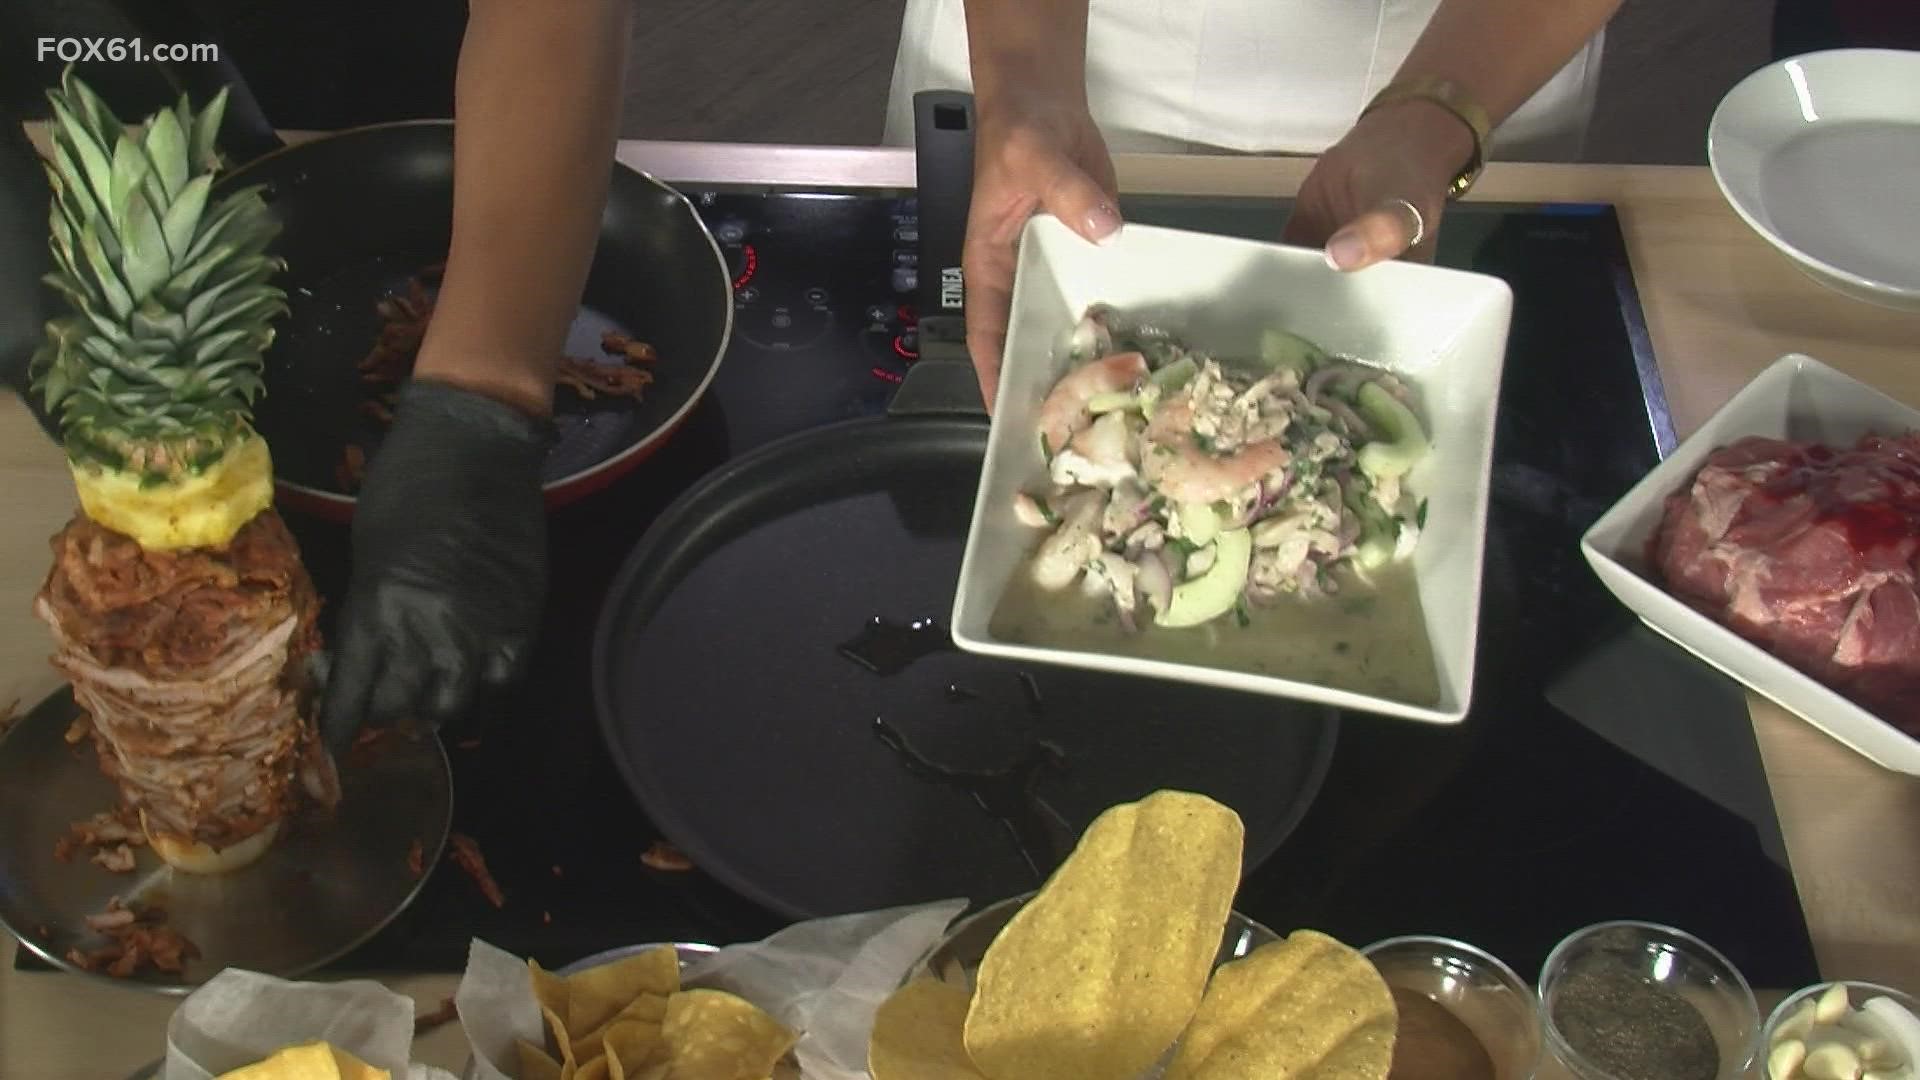 Learn how to make this delicious recipe from Frida, a Mexican cuisine restaurant in West Hartford!